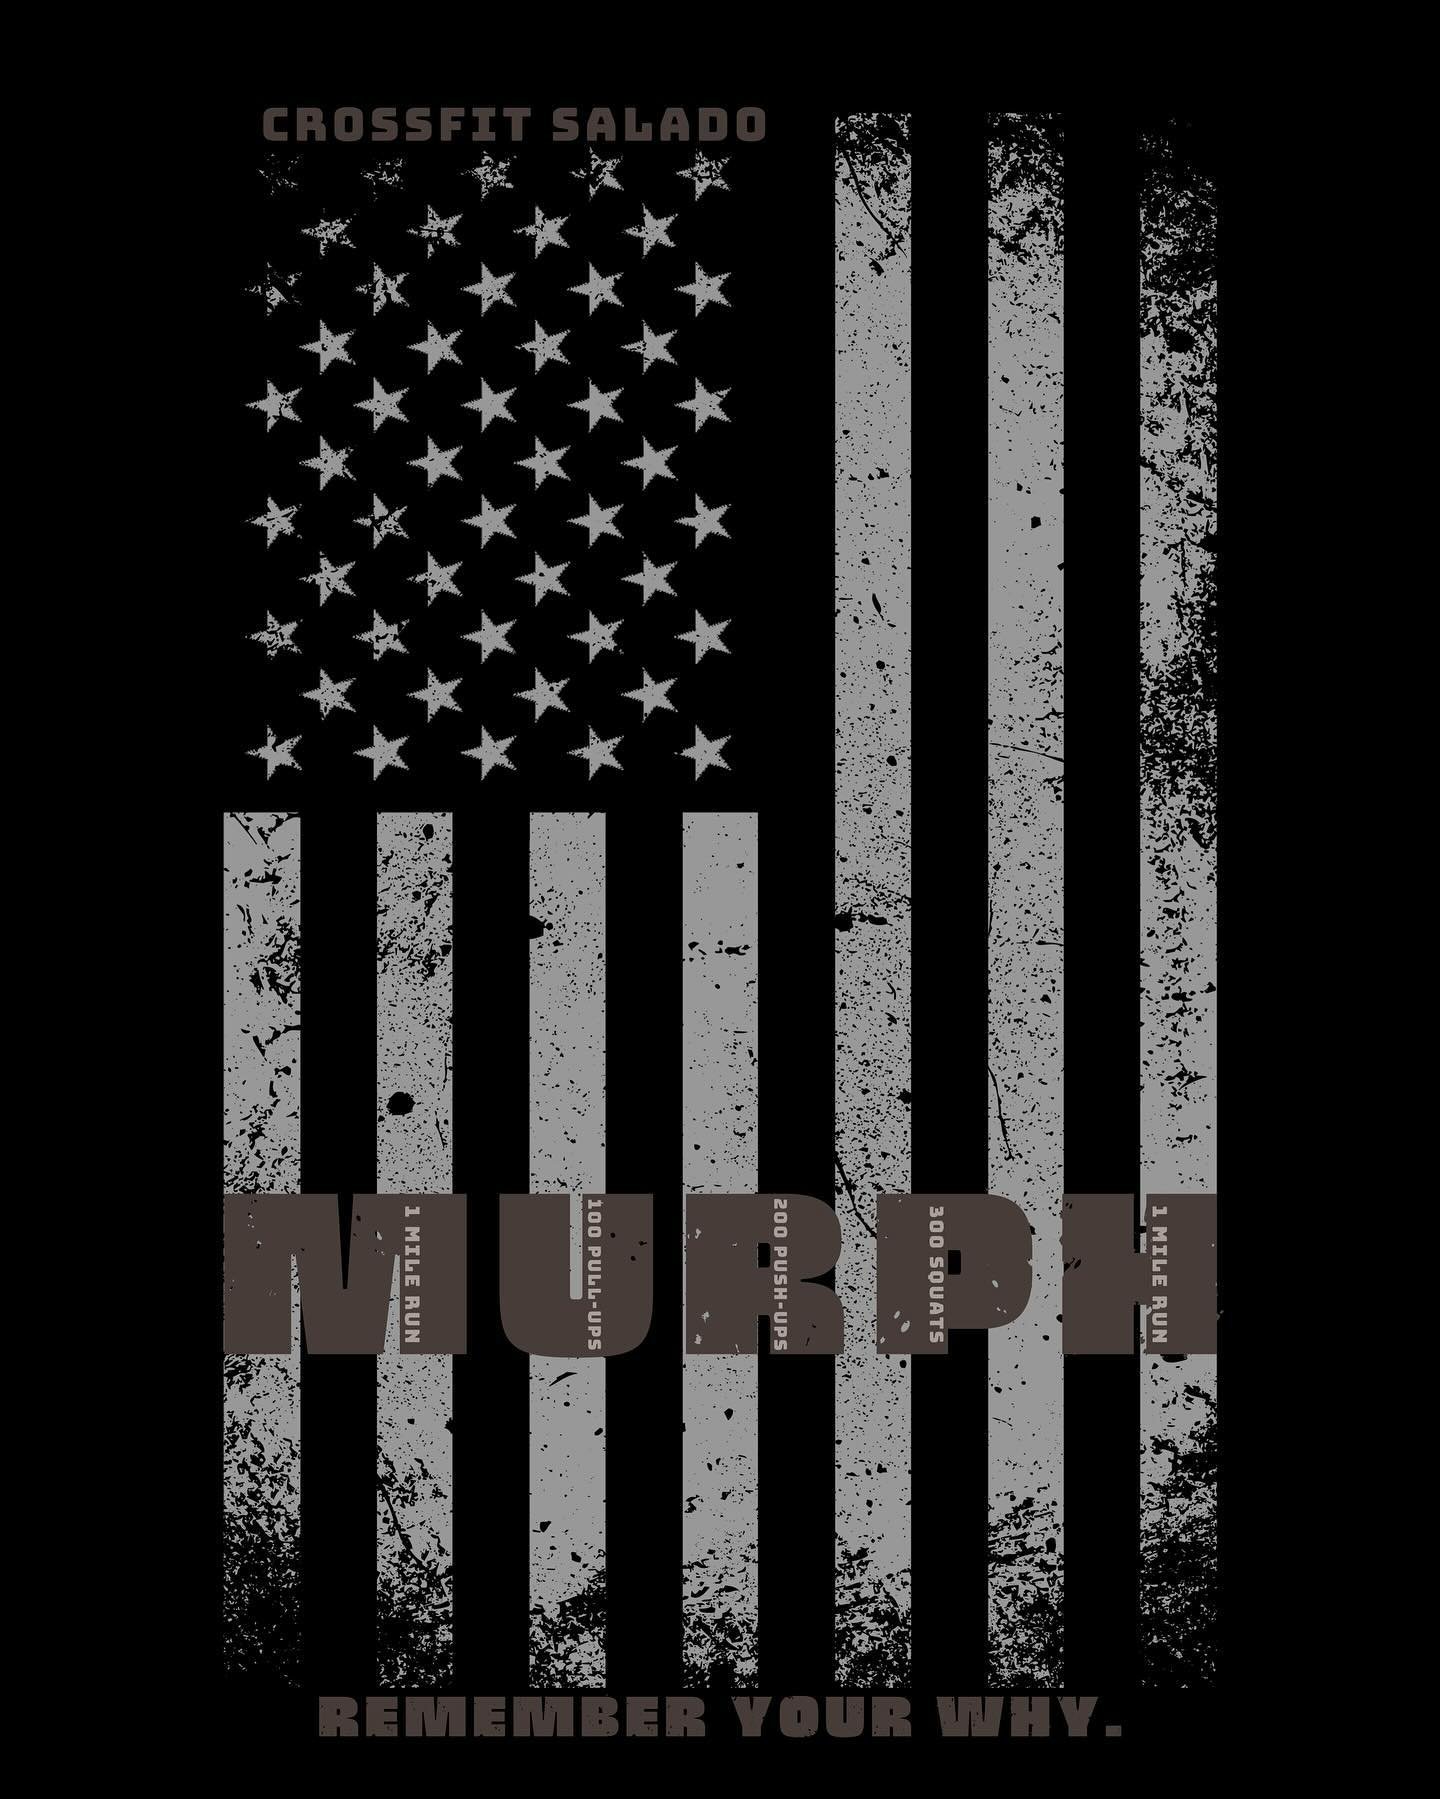 We&rsquo;ve had lots of people asking about Murph shirts so we&rsquo;ve decided to do some last minute shirts.⁣
⁣
This year we have decided to do something special. 100% of the proceeds from the shirts sold will go towards the @mightyoaksfndn , a fai